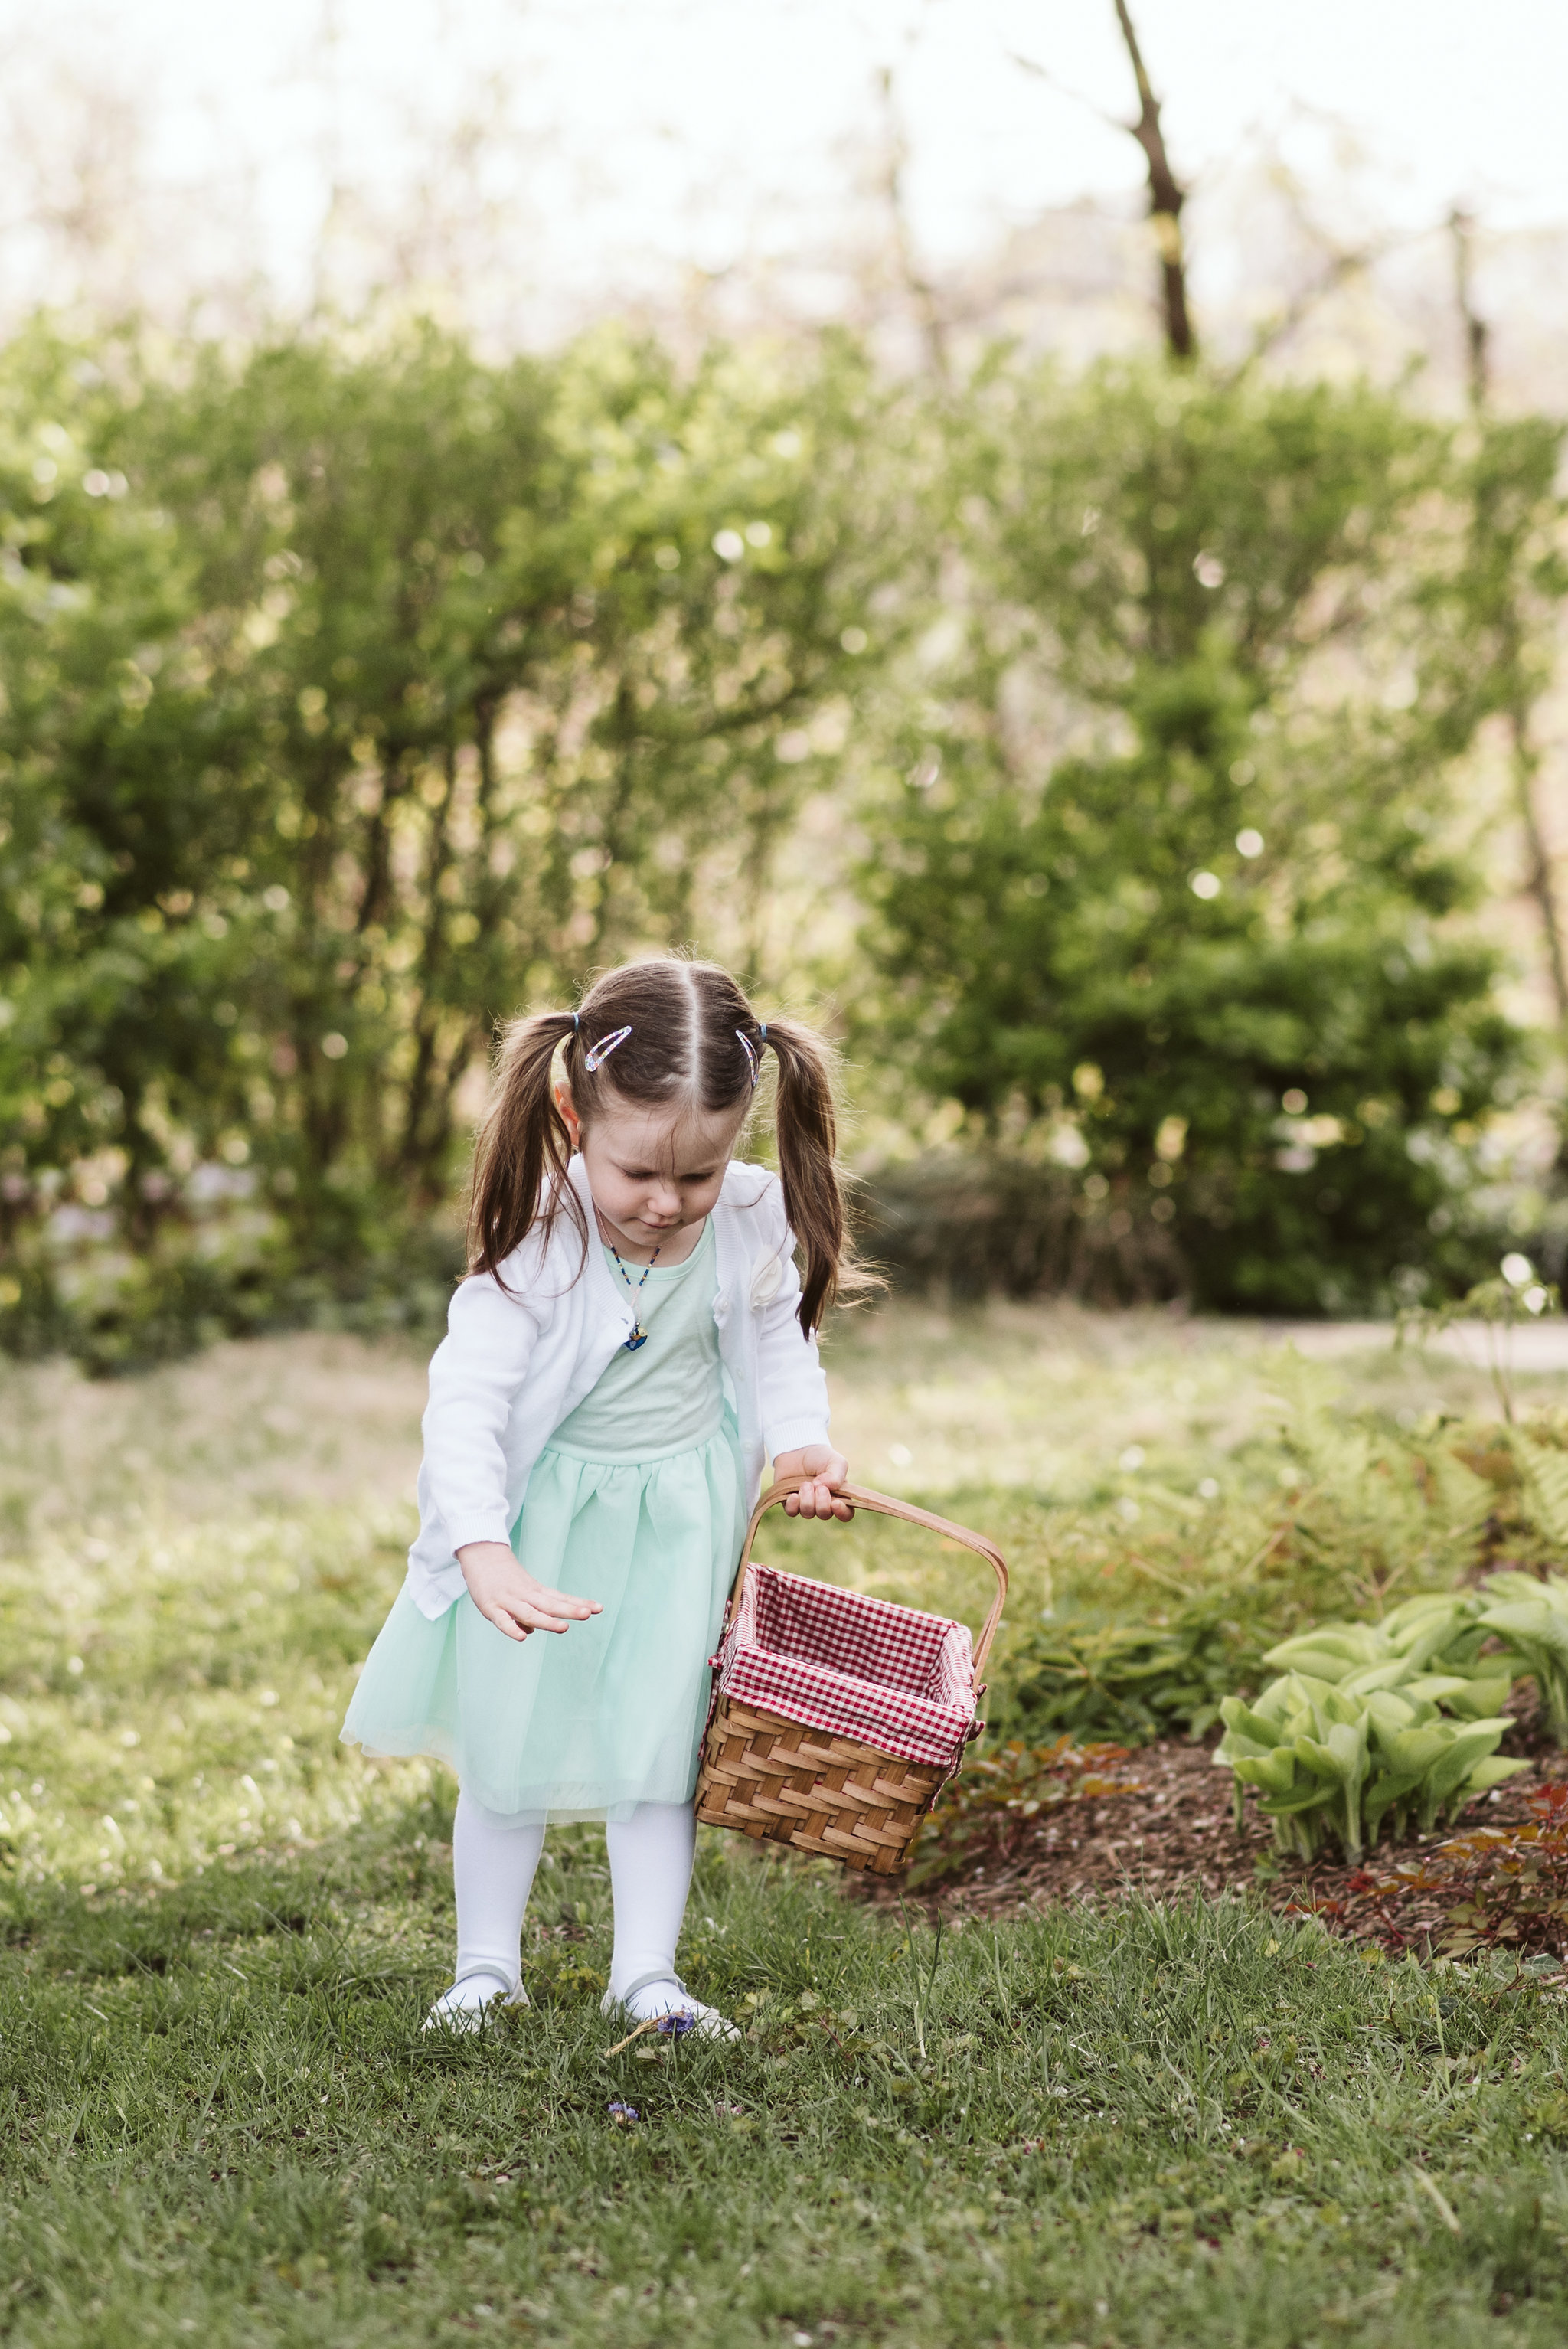  Baltimore, Maryland Wedding Photographer, Hampden, Eco-Friendly, Green, The Elm, Simple and Classic, Vintage, Flower Girl with Picnic Basket of Flowers 